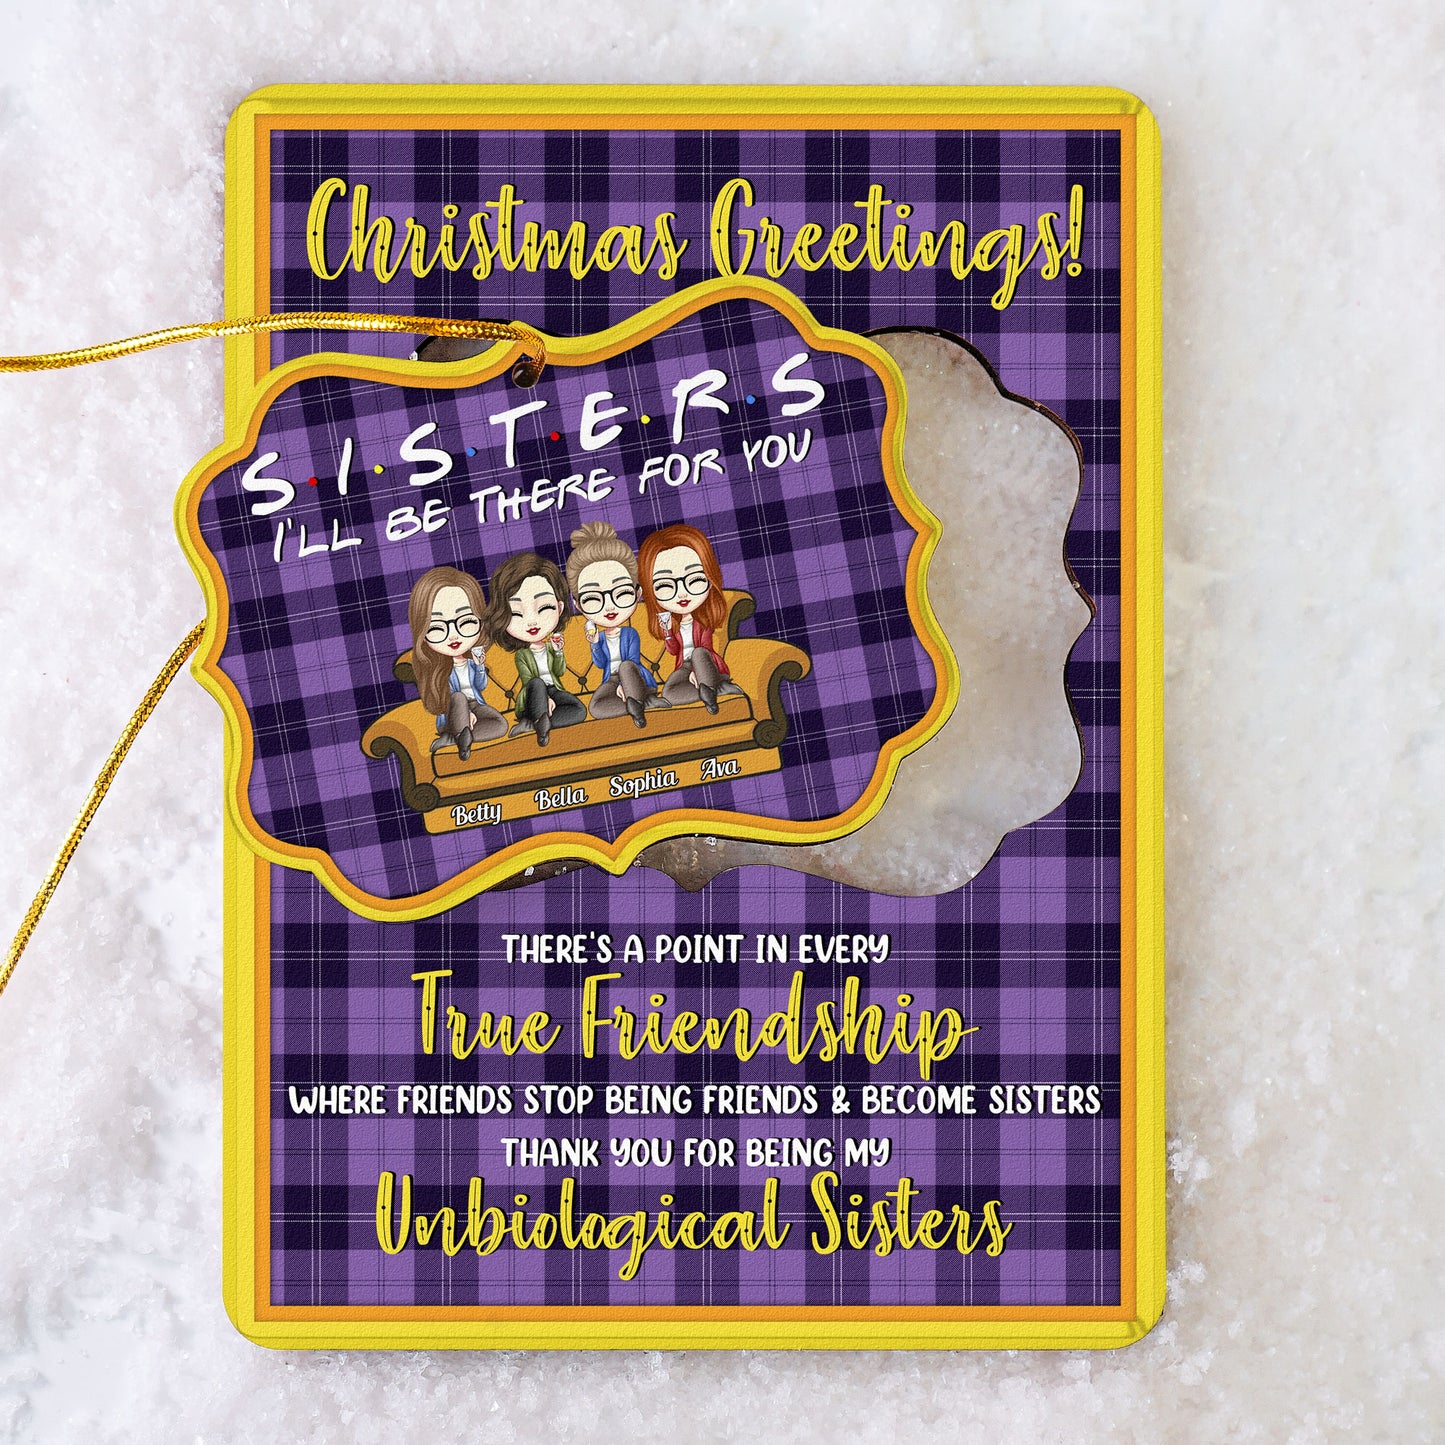 Christmas Greetings! I'll Be There For You - Personalized Wooden Card With Pop Out Ornament - Christmas Gift For Besties, Soul Sisters, Friends